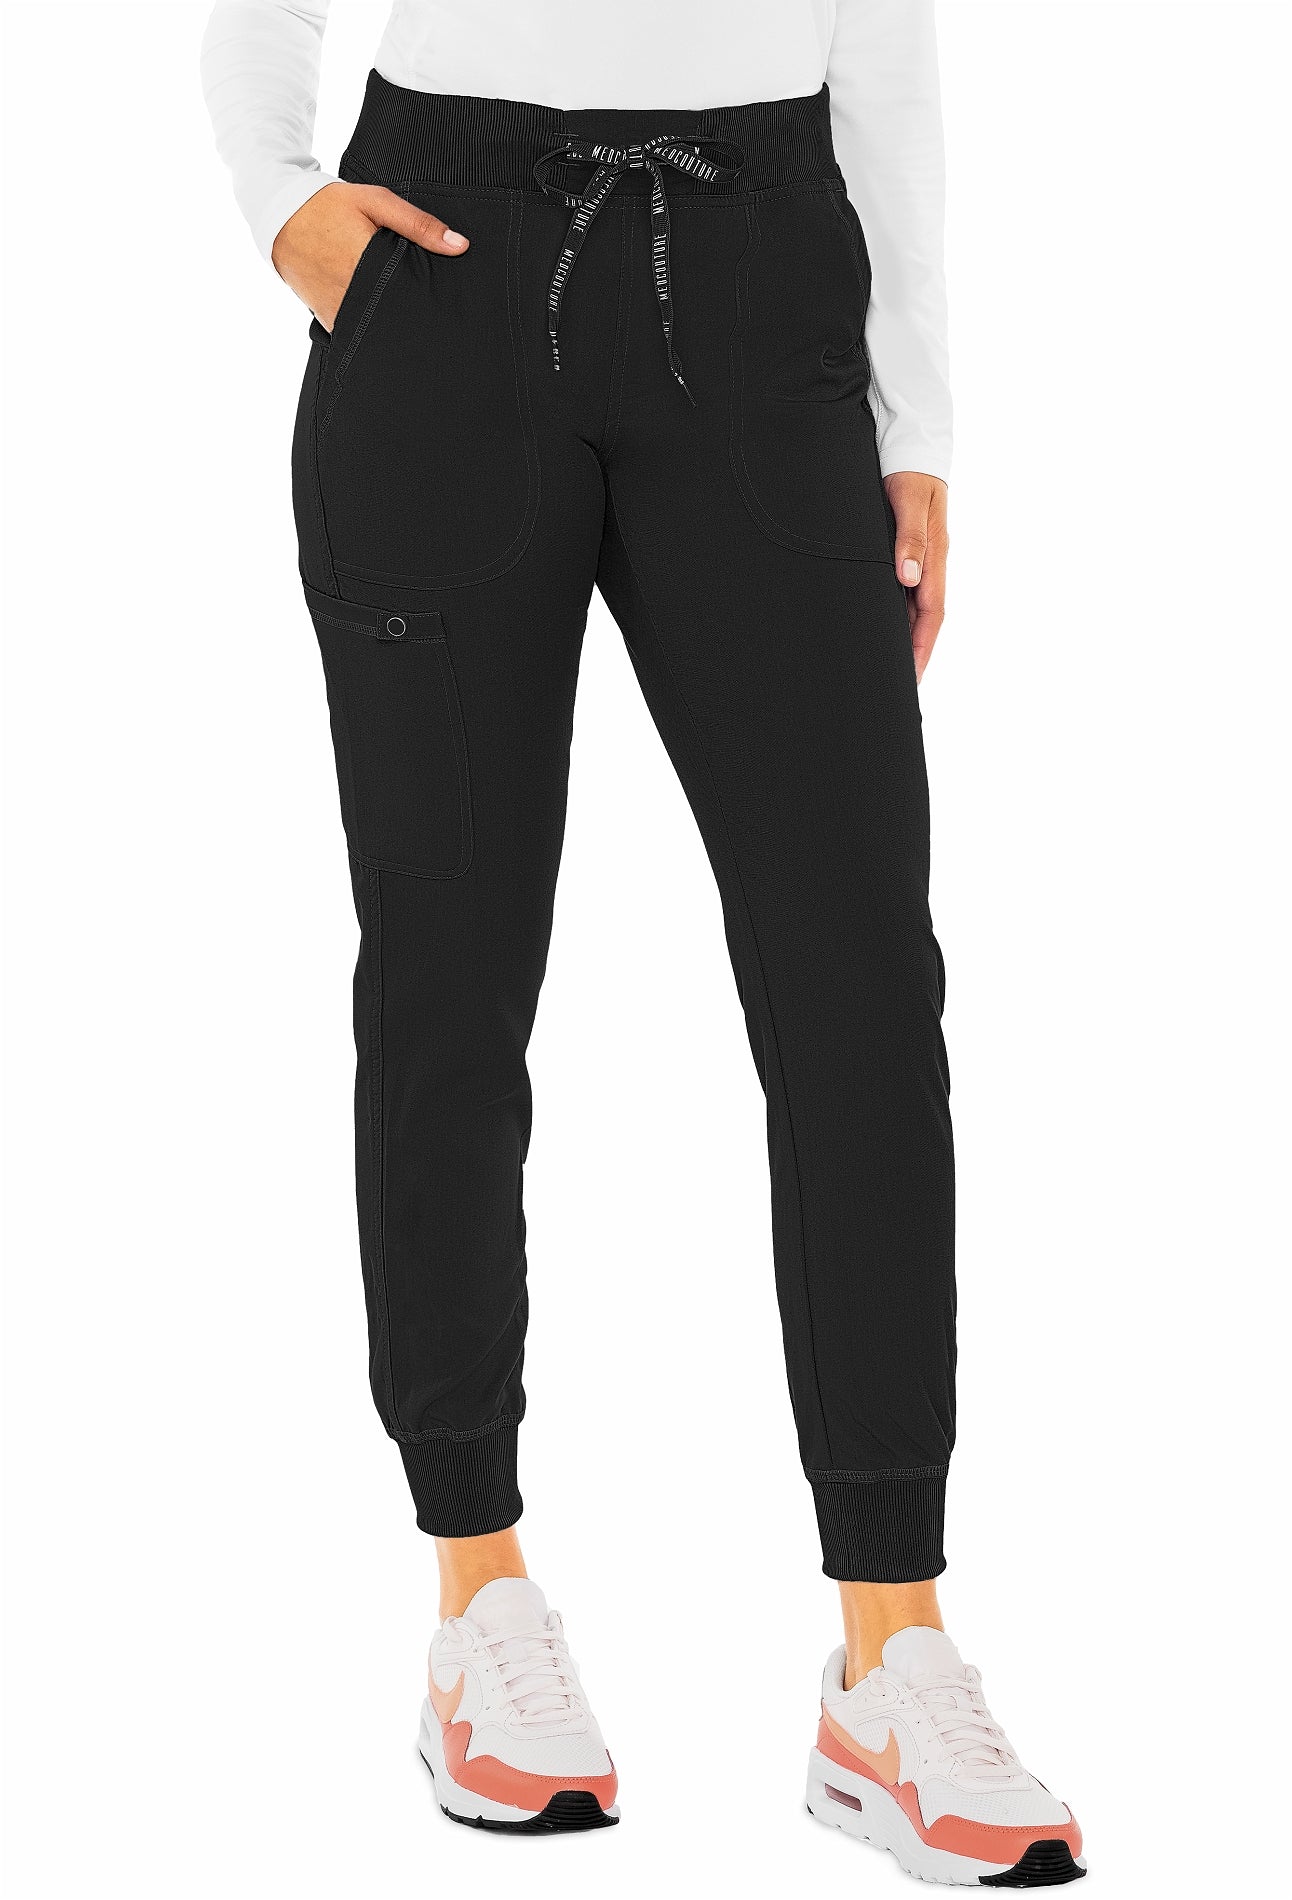 Med Couture Touch Jogger Yoga Pant | 7710